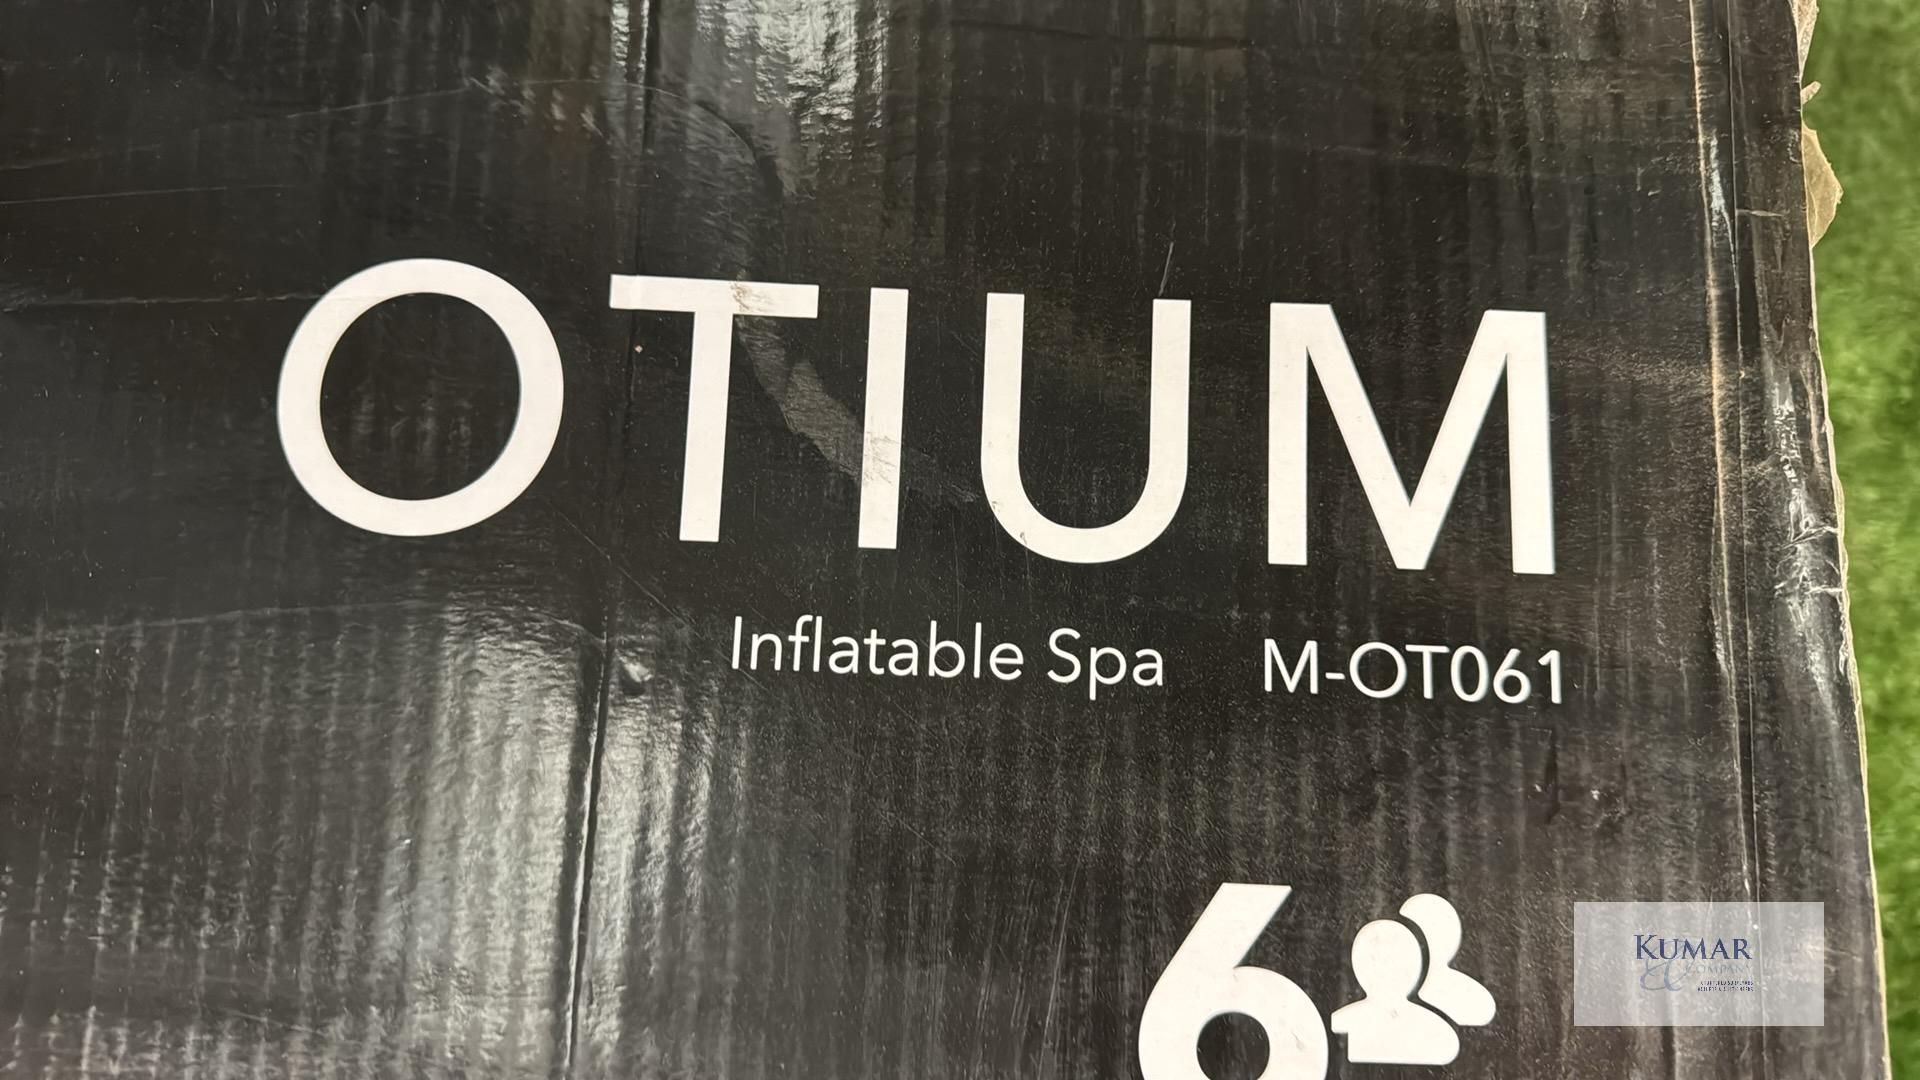 M Spa Otium Muse Series M- OT061 6 Bather Inflatable Spa Display Model Never Been Used with Box - Image 7 of 16